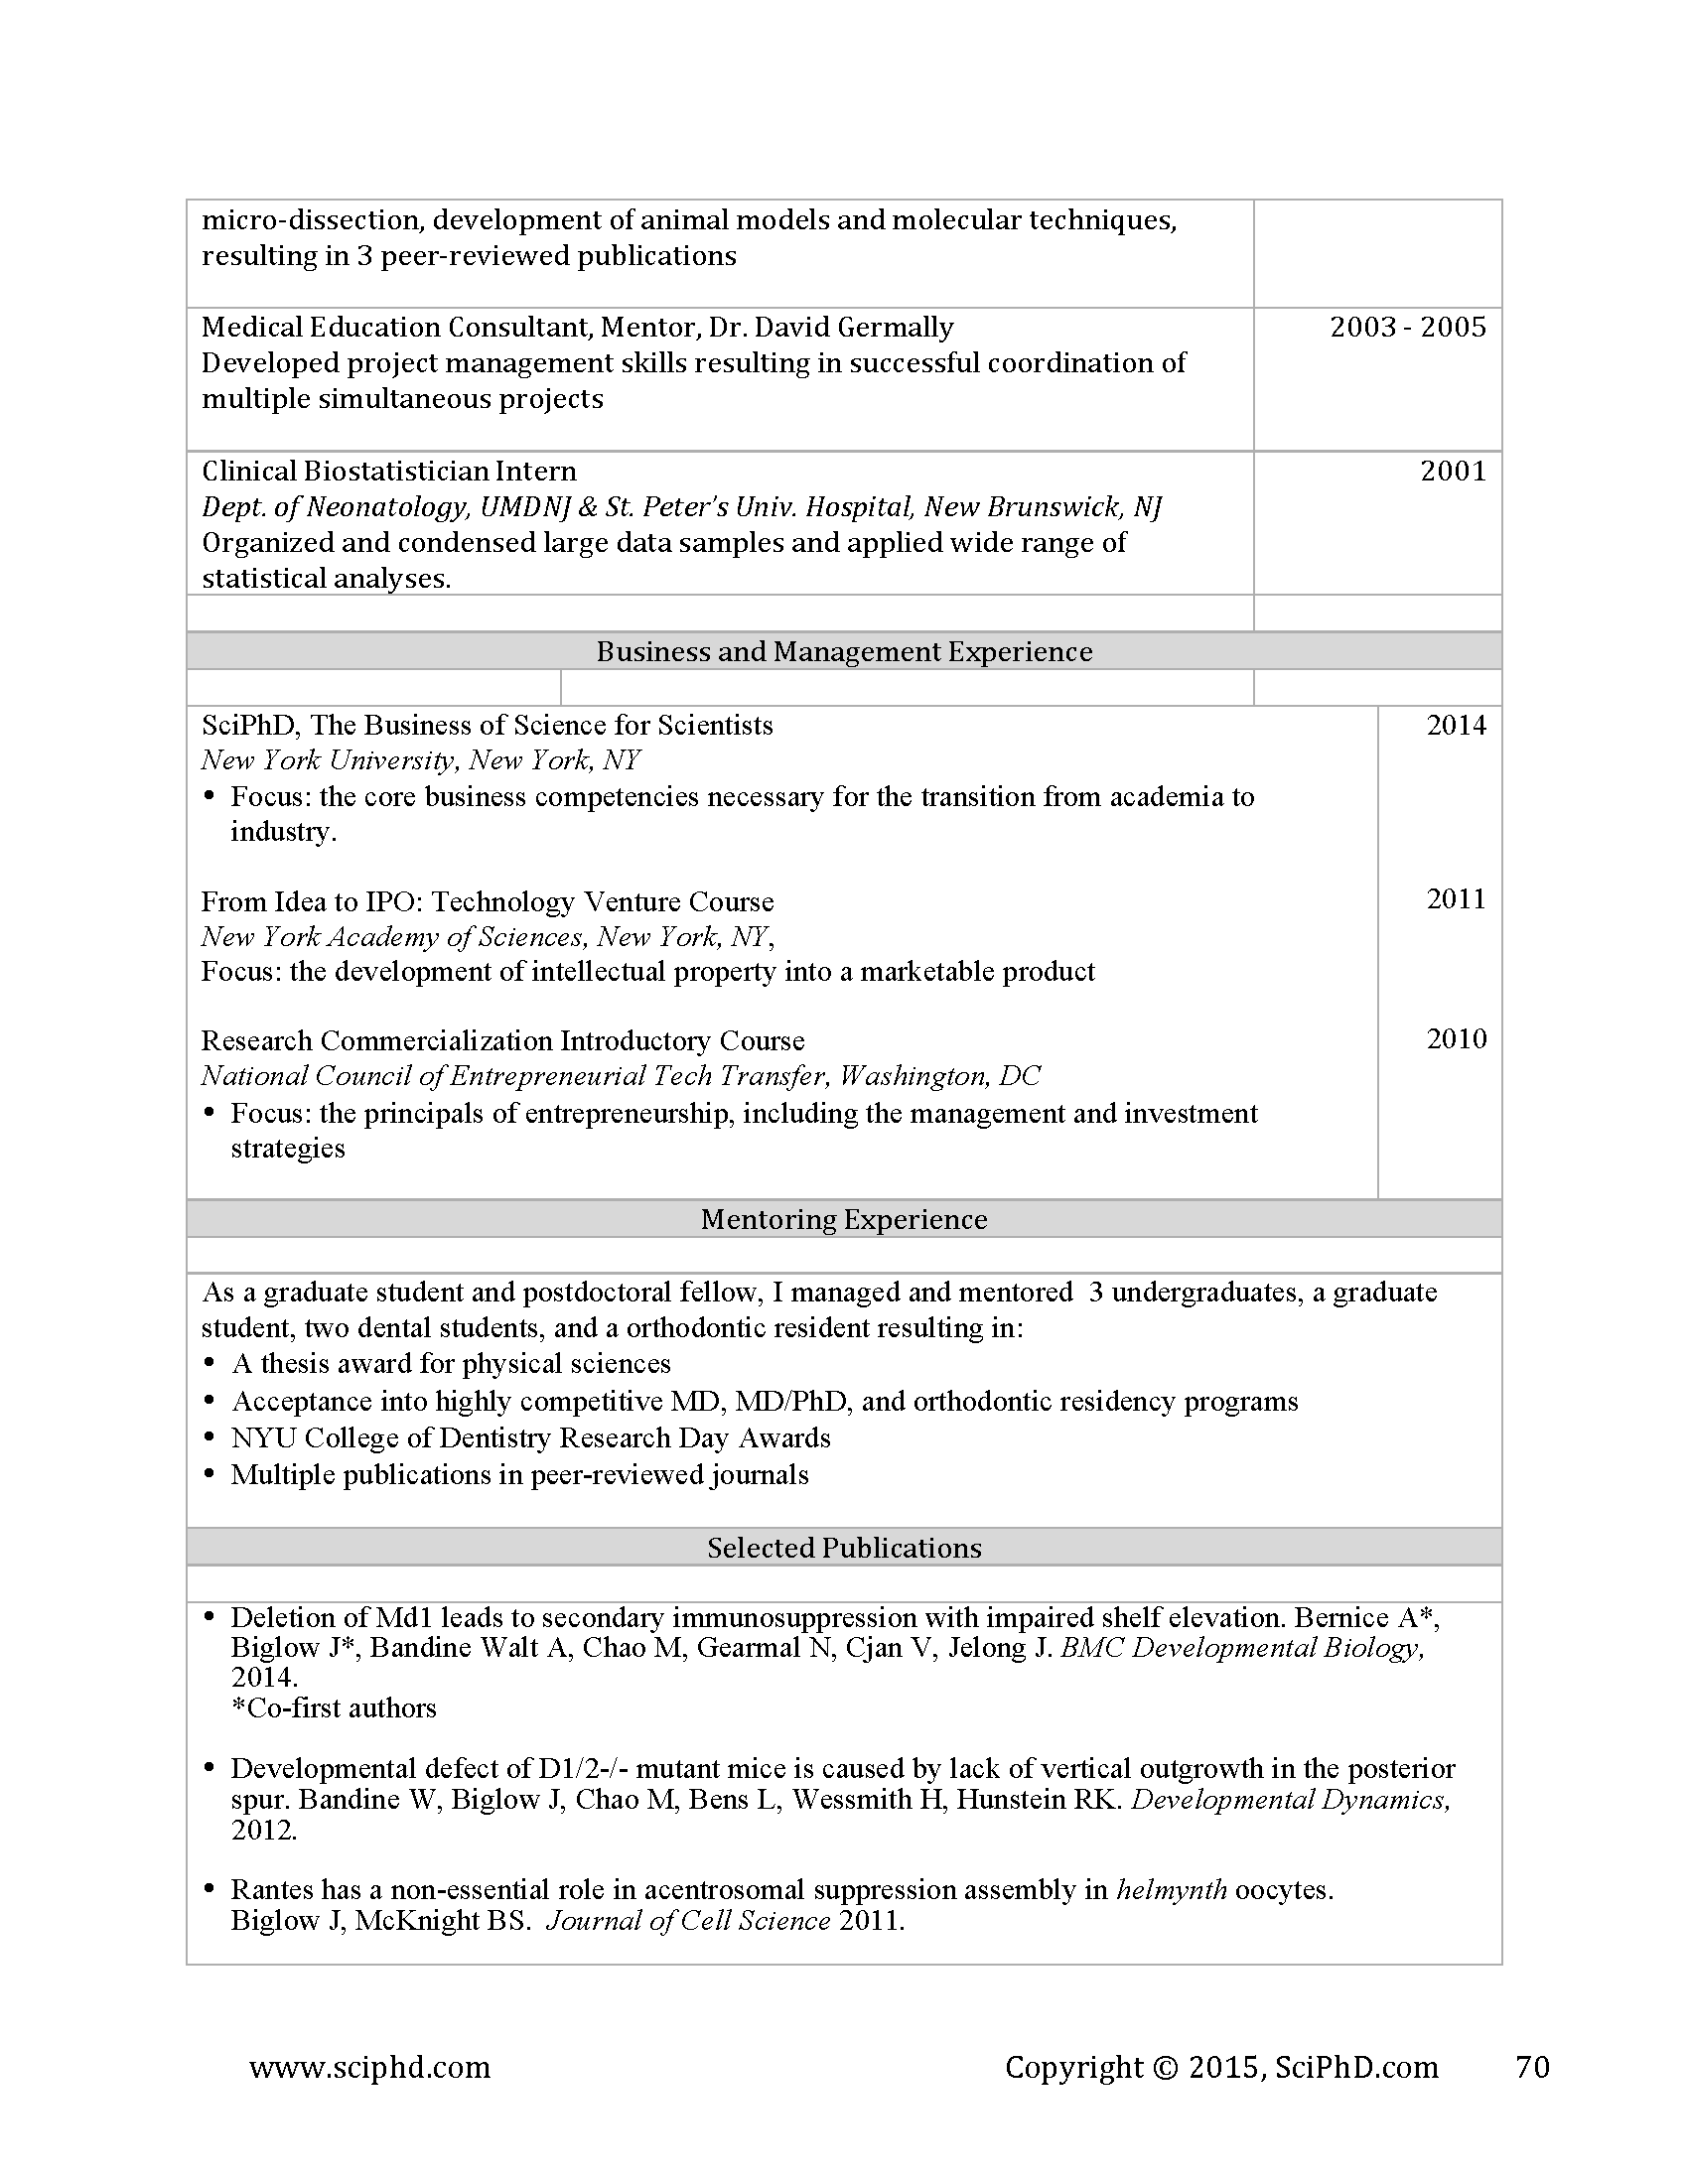 Targeted Resume example_Page_2